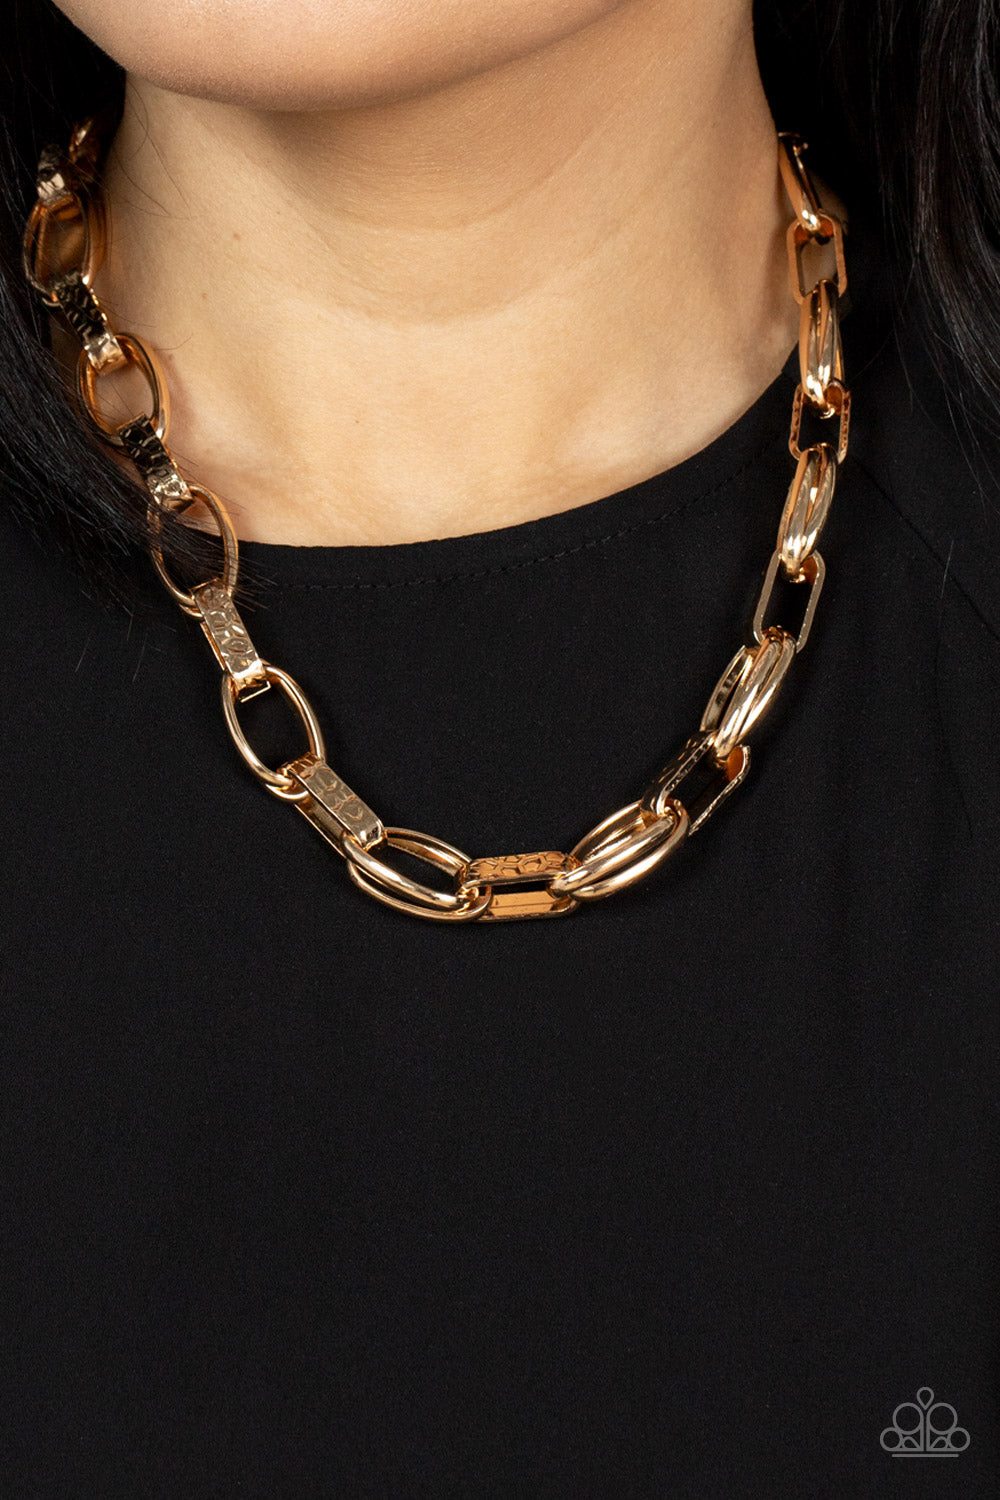 Motley in Motion - Gold Link Necklaces wide hammered gold links alternate with double sets of shiny gold links as they connect across the collar for an edgy industrial effect. Features an adjustable clasp closure.  Sold as one individual necklace. Includes one pair of matching earrings.